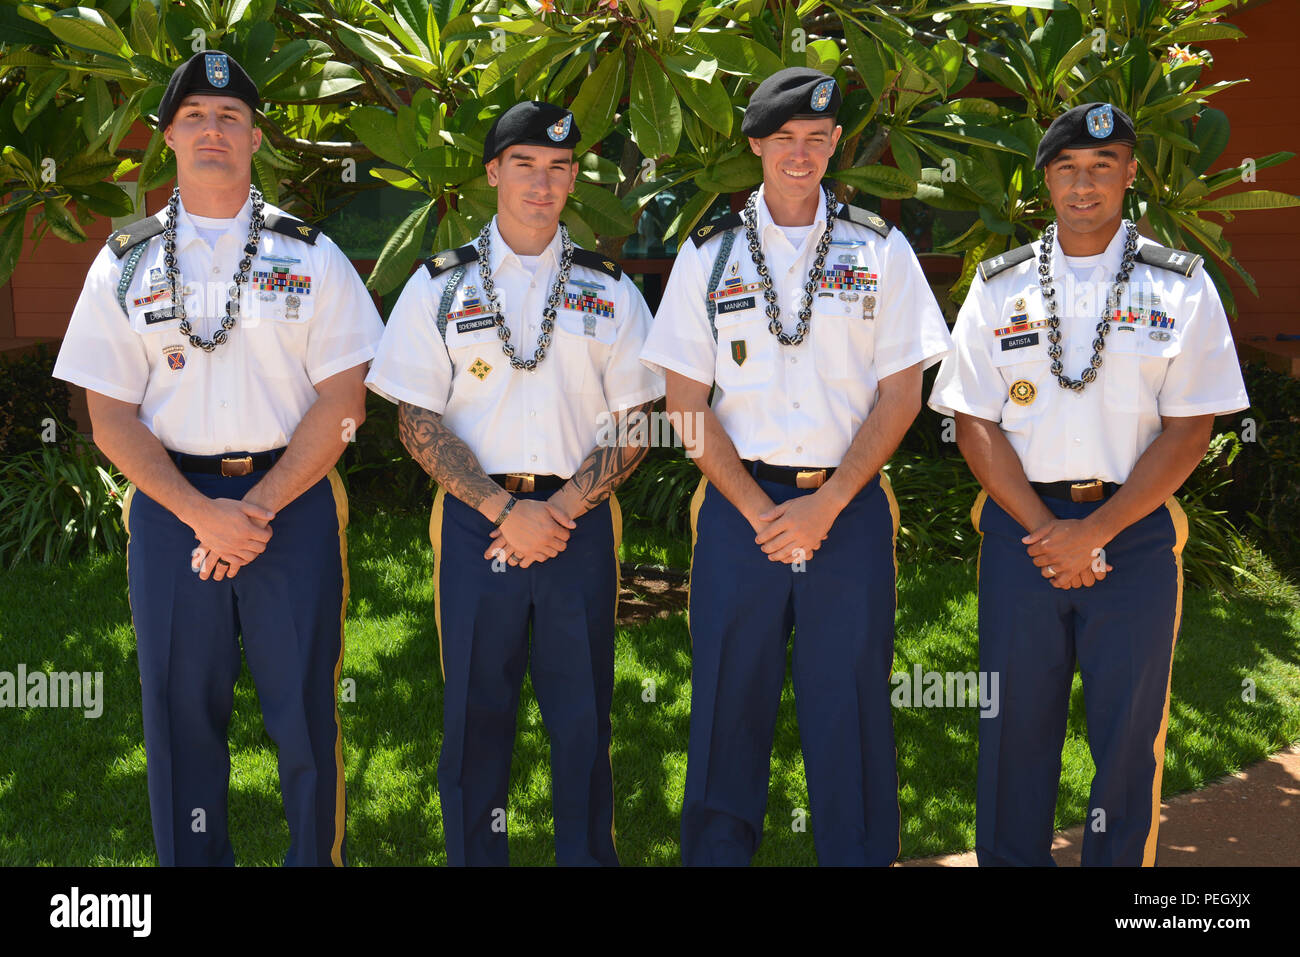 Sgt. Ryan M. Douglas (left), a native of New Port Richey, Fla., Sgt. Bryan E. Shermerhorn (middle left), a native of Cohoes, N.Y., Staff Sgt. Eric E. Mankin (middle right), a native of Sparks, Nev., all are infantrymen assigned to Company C, 1st Battalion, 21st Infantry Regiment, 2nd Stryker Brigade Combat Team, 25th Infantry Division, and Capt. Edson Batista (right), a native of Brockton, Mass., a communications officer assigned to Headquarters and Headquarters Company, 1-21 Infantry, were recognized during the Joint Venture Education Forum at the Salvation Army Ray and Joan Kroc Corps Commun Stock Photo